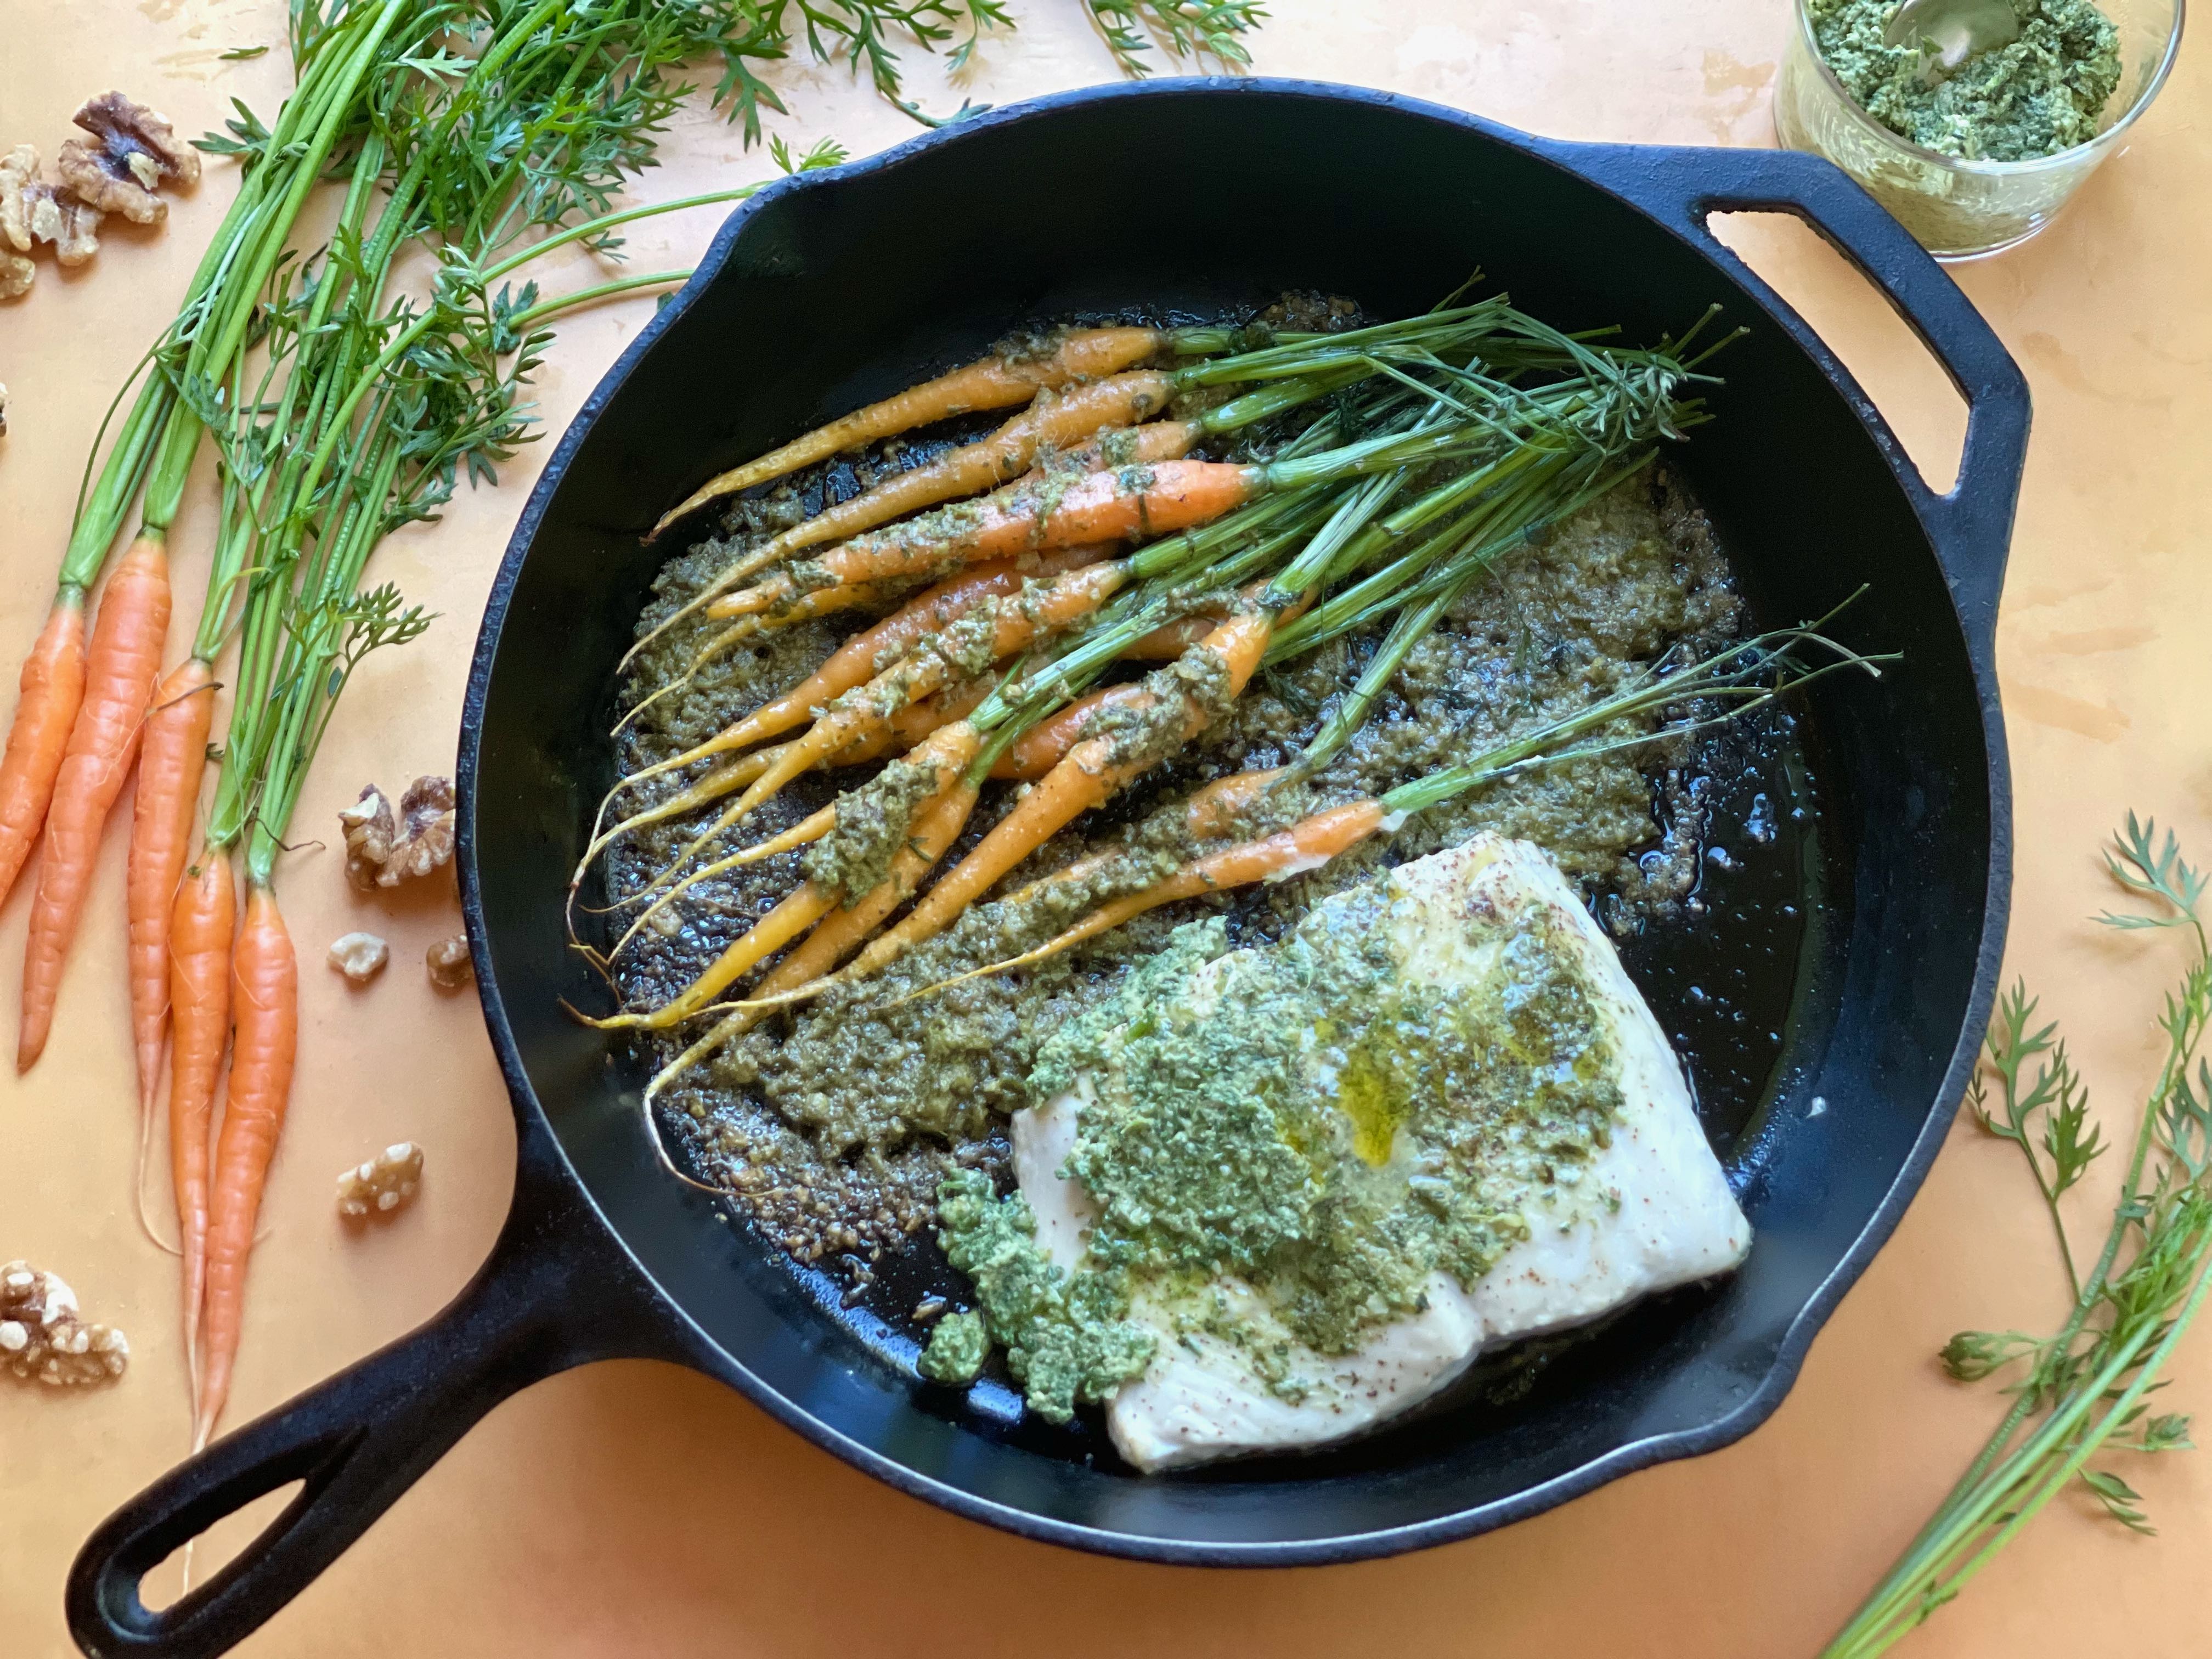 Featured image for “Roasted Salmon with Carrot Top Pesto”